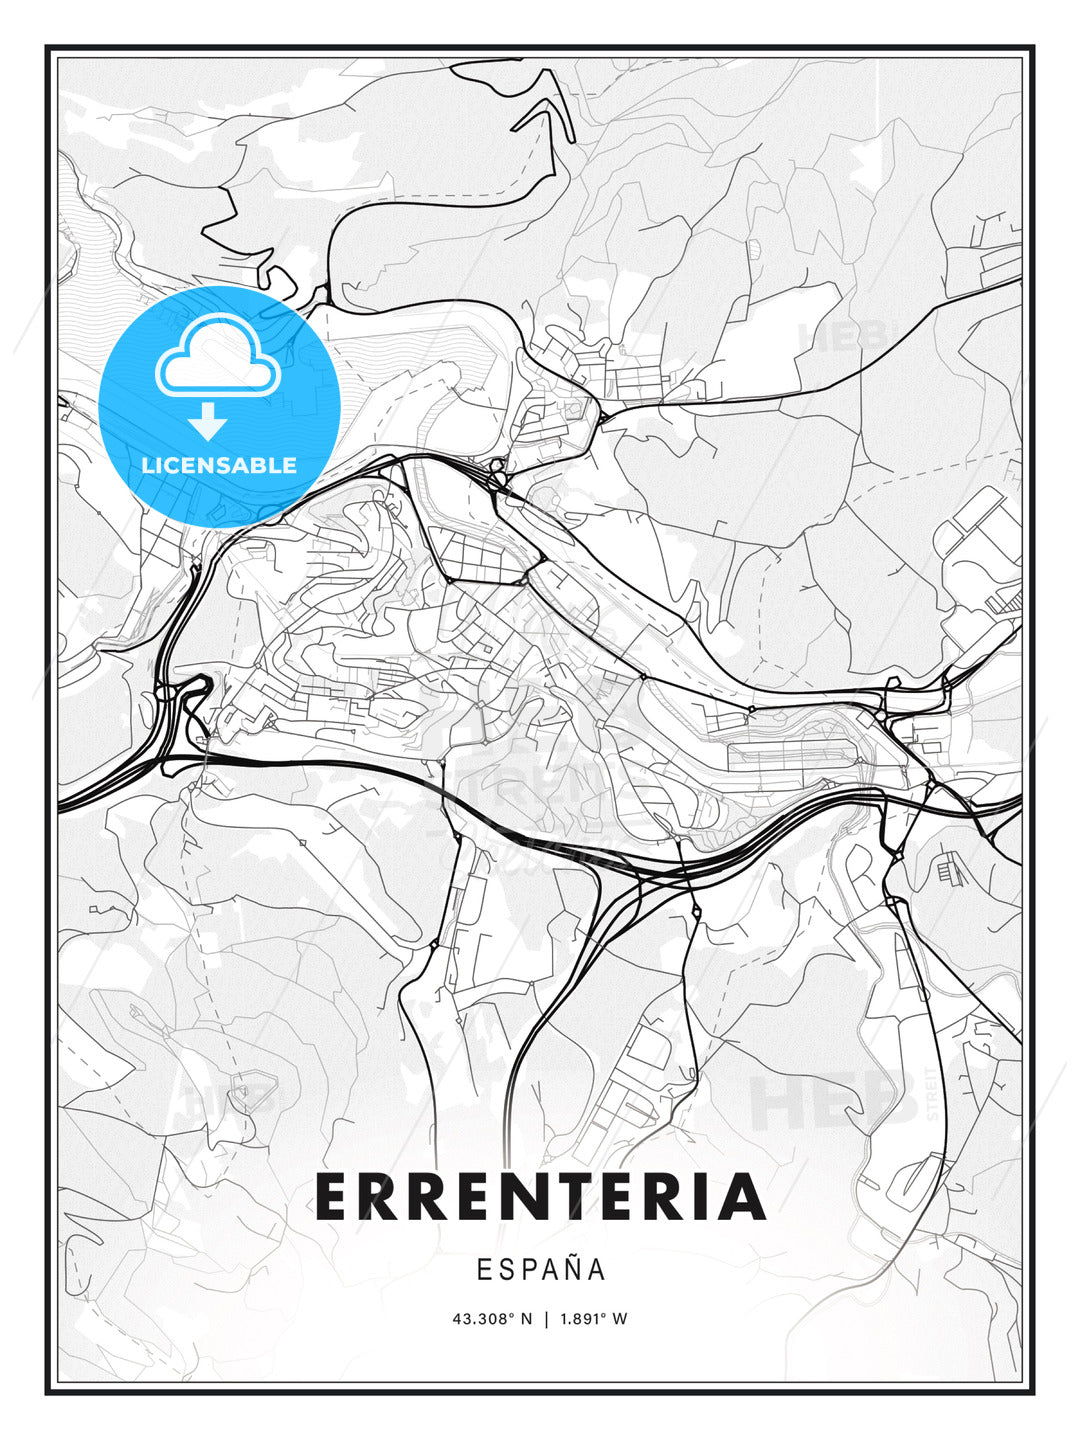 Errenteria, Spain, Modern Print Template in Various Formats - HEBSTREITS Sketches